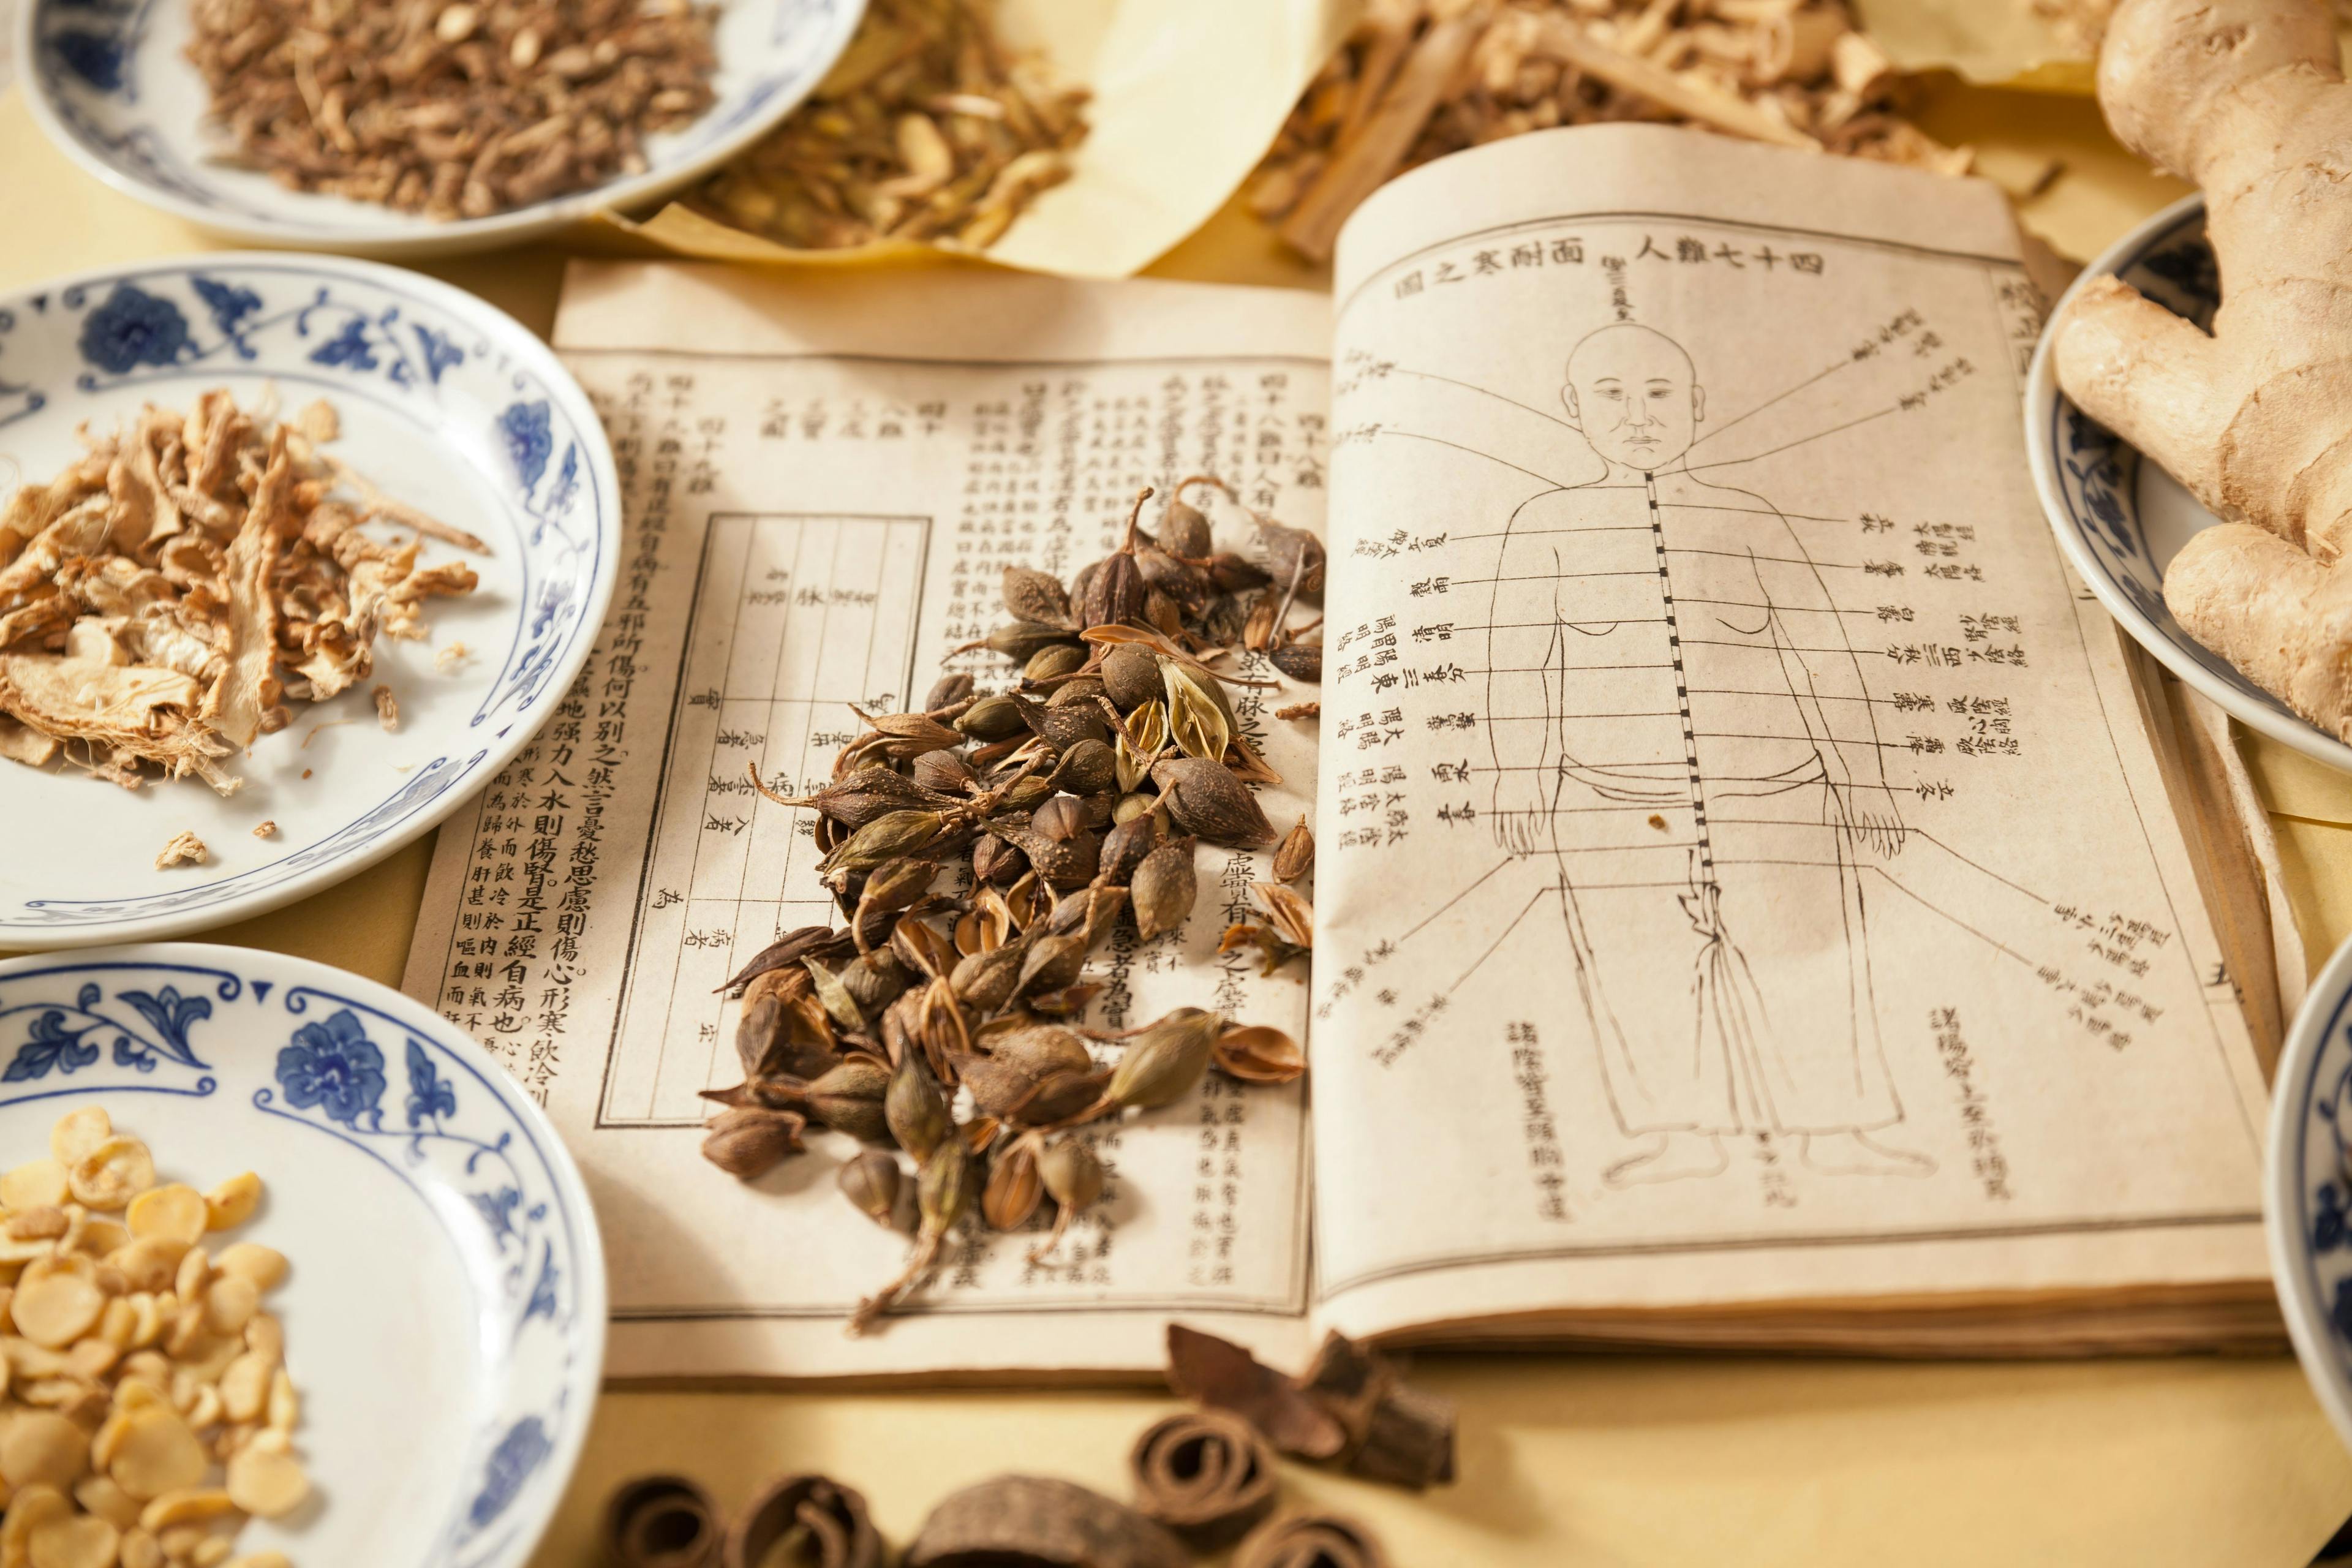 Chinese herbs | Image Credit: © ft2010 - stock.adobe.com